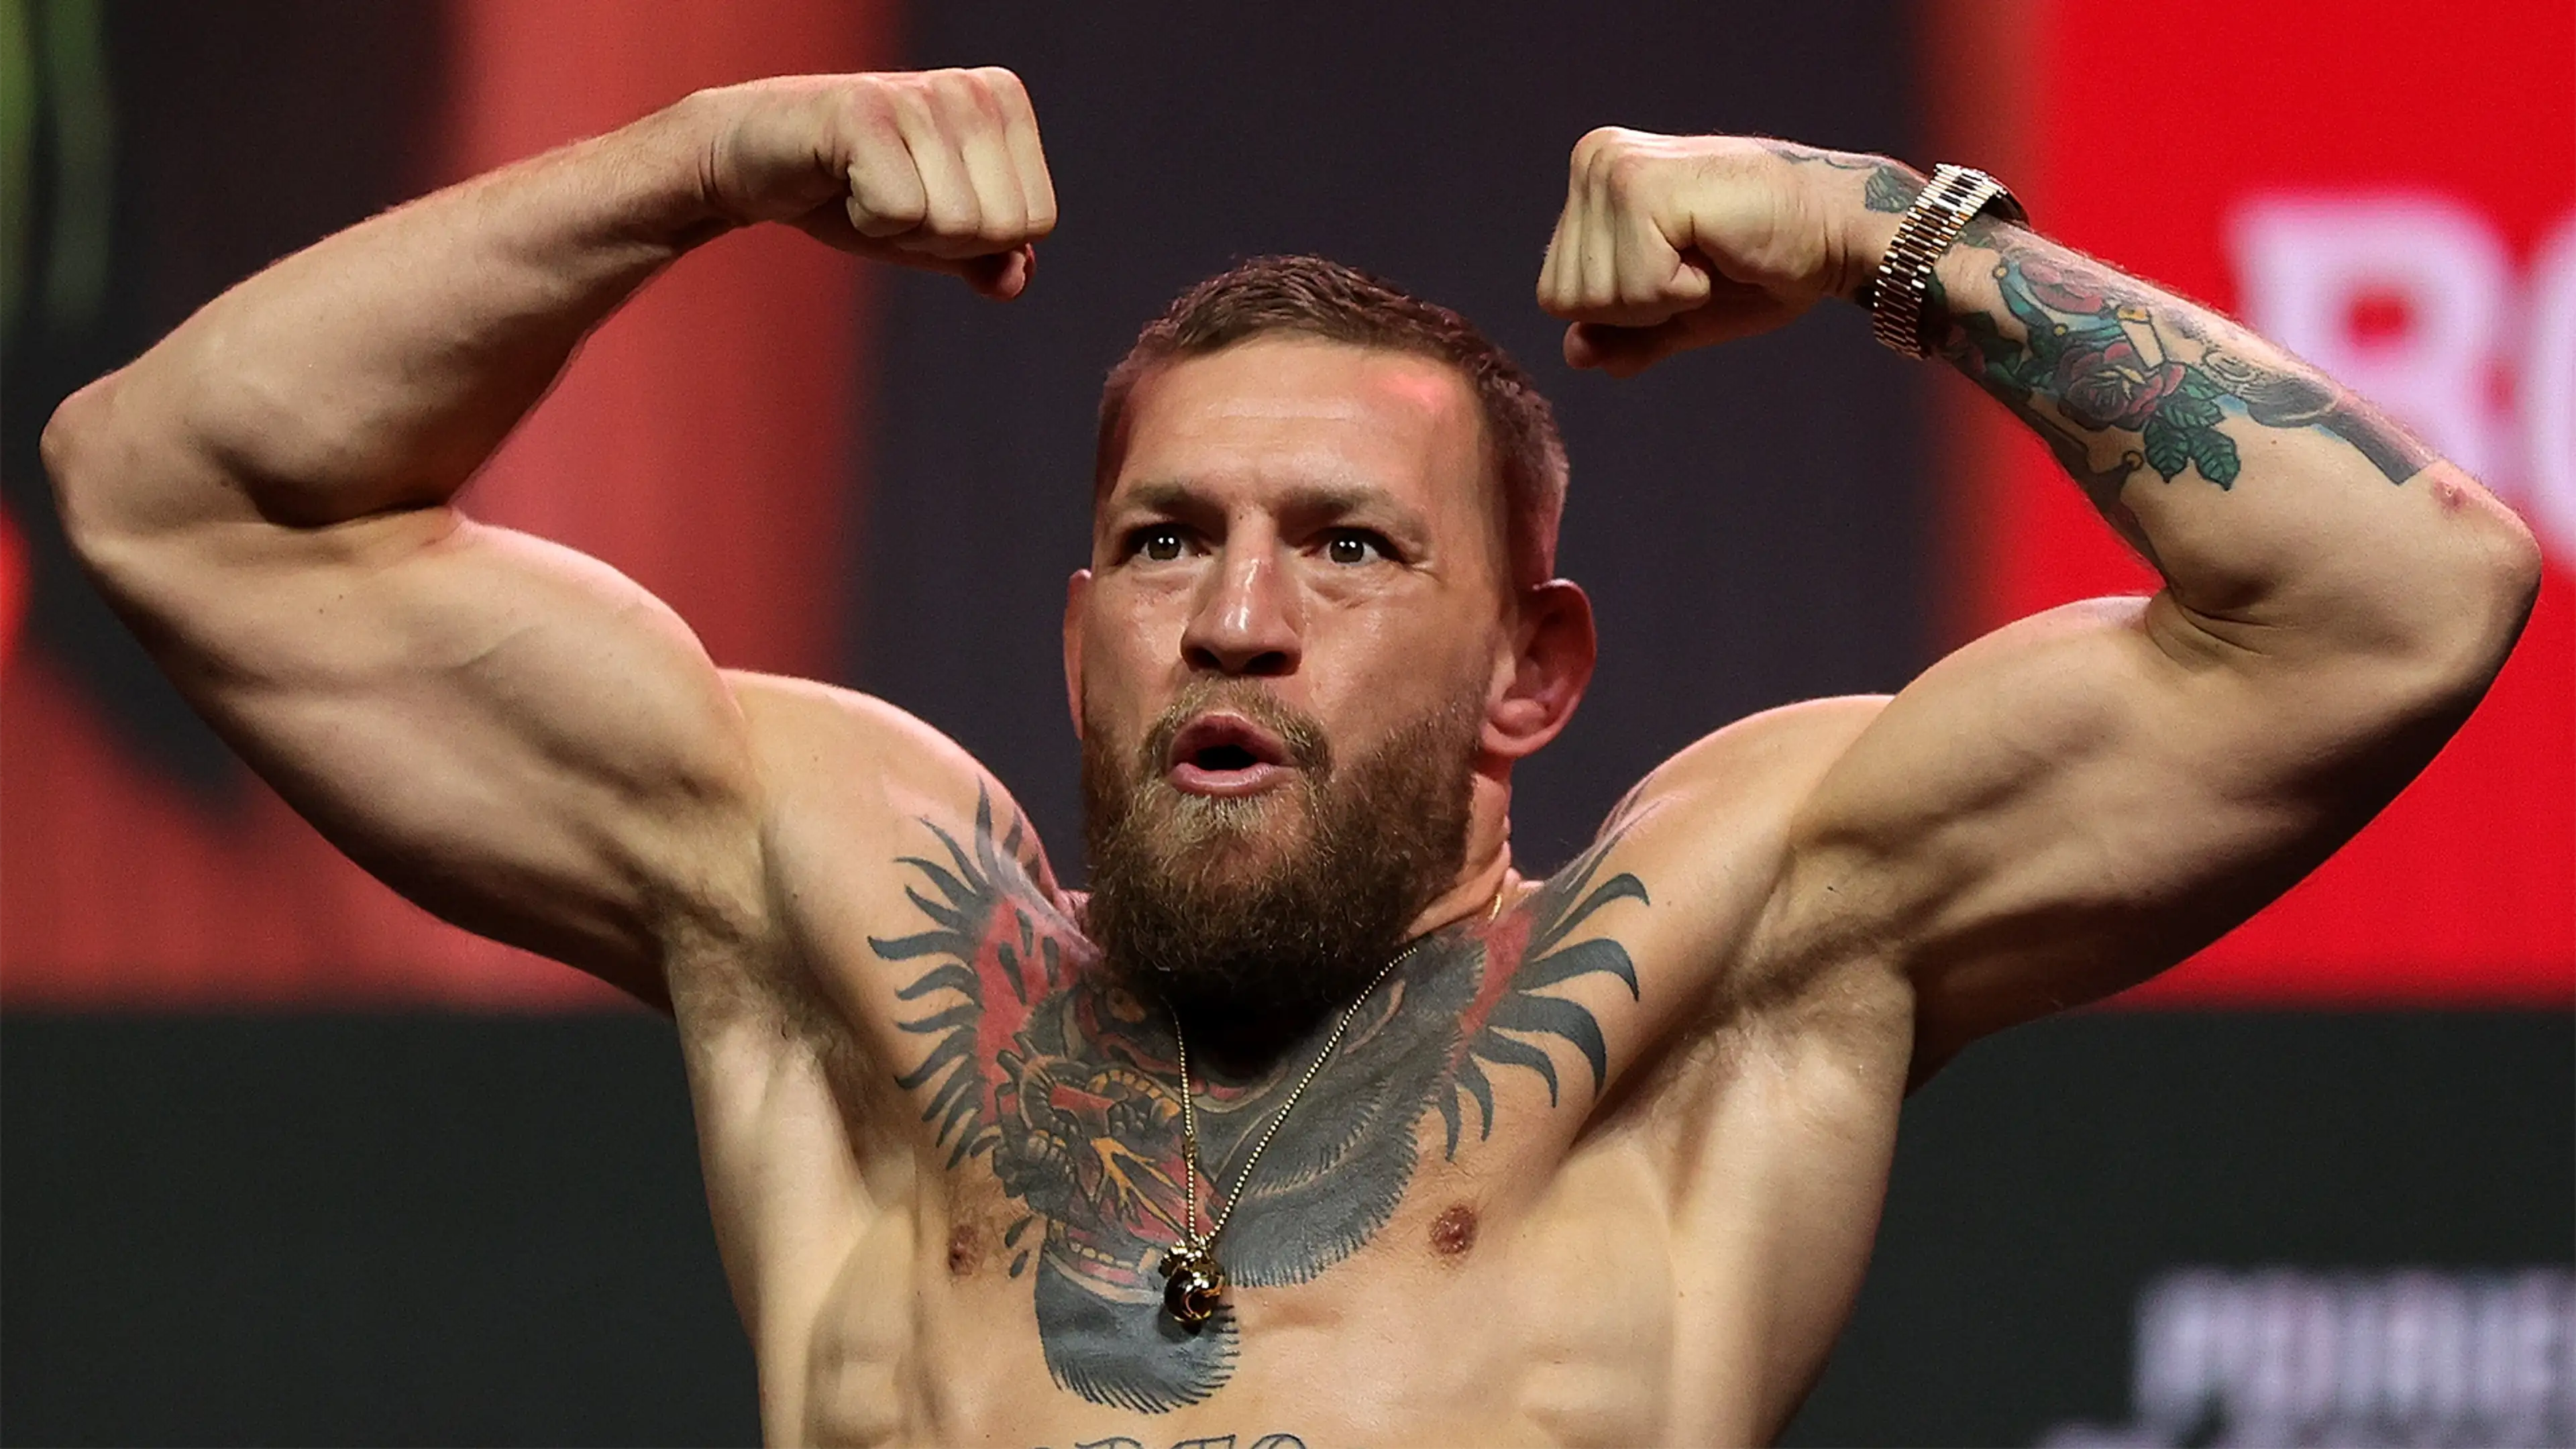 McGregor Says He Will Fight Chandler in December at UFC 296